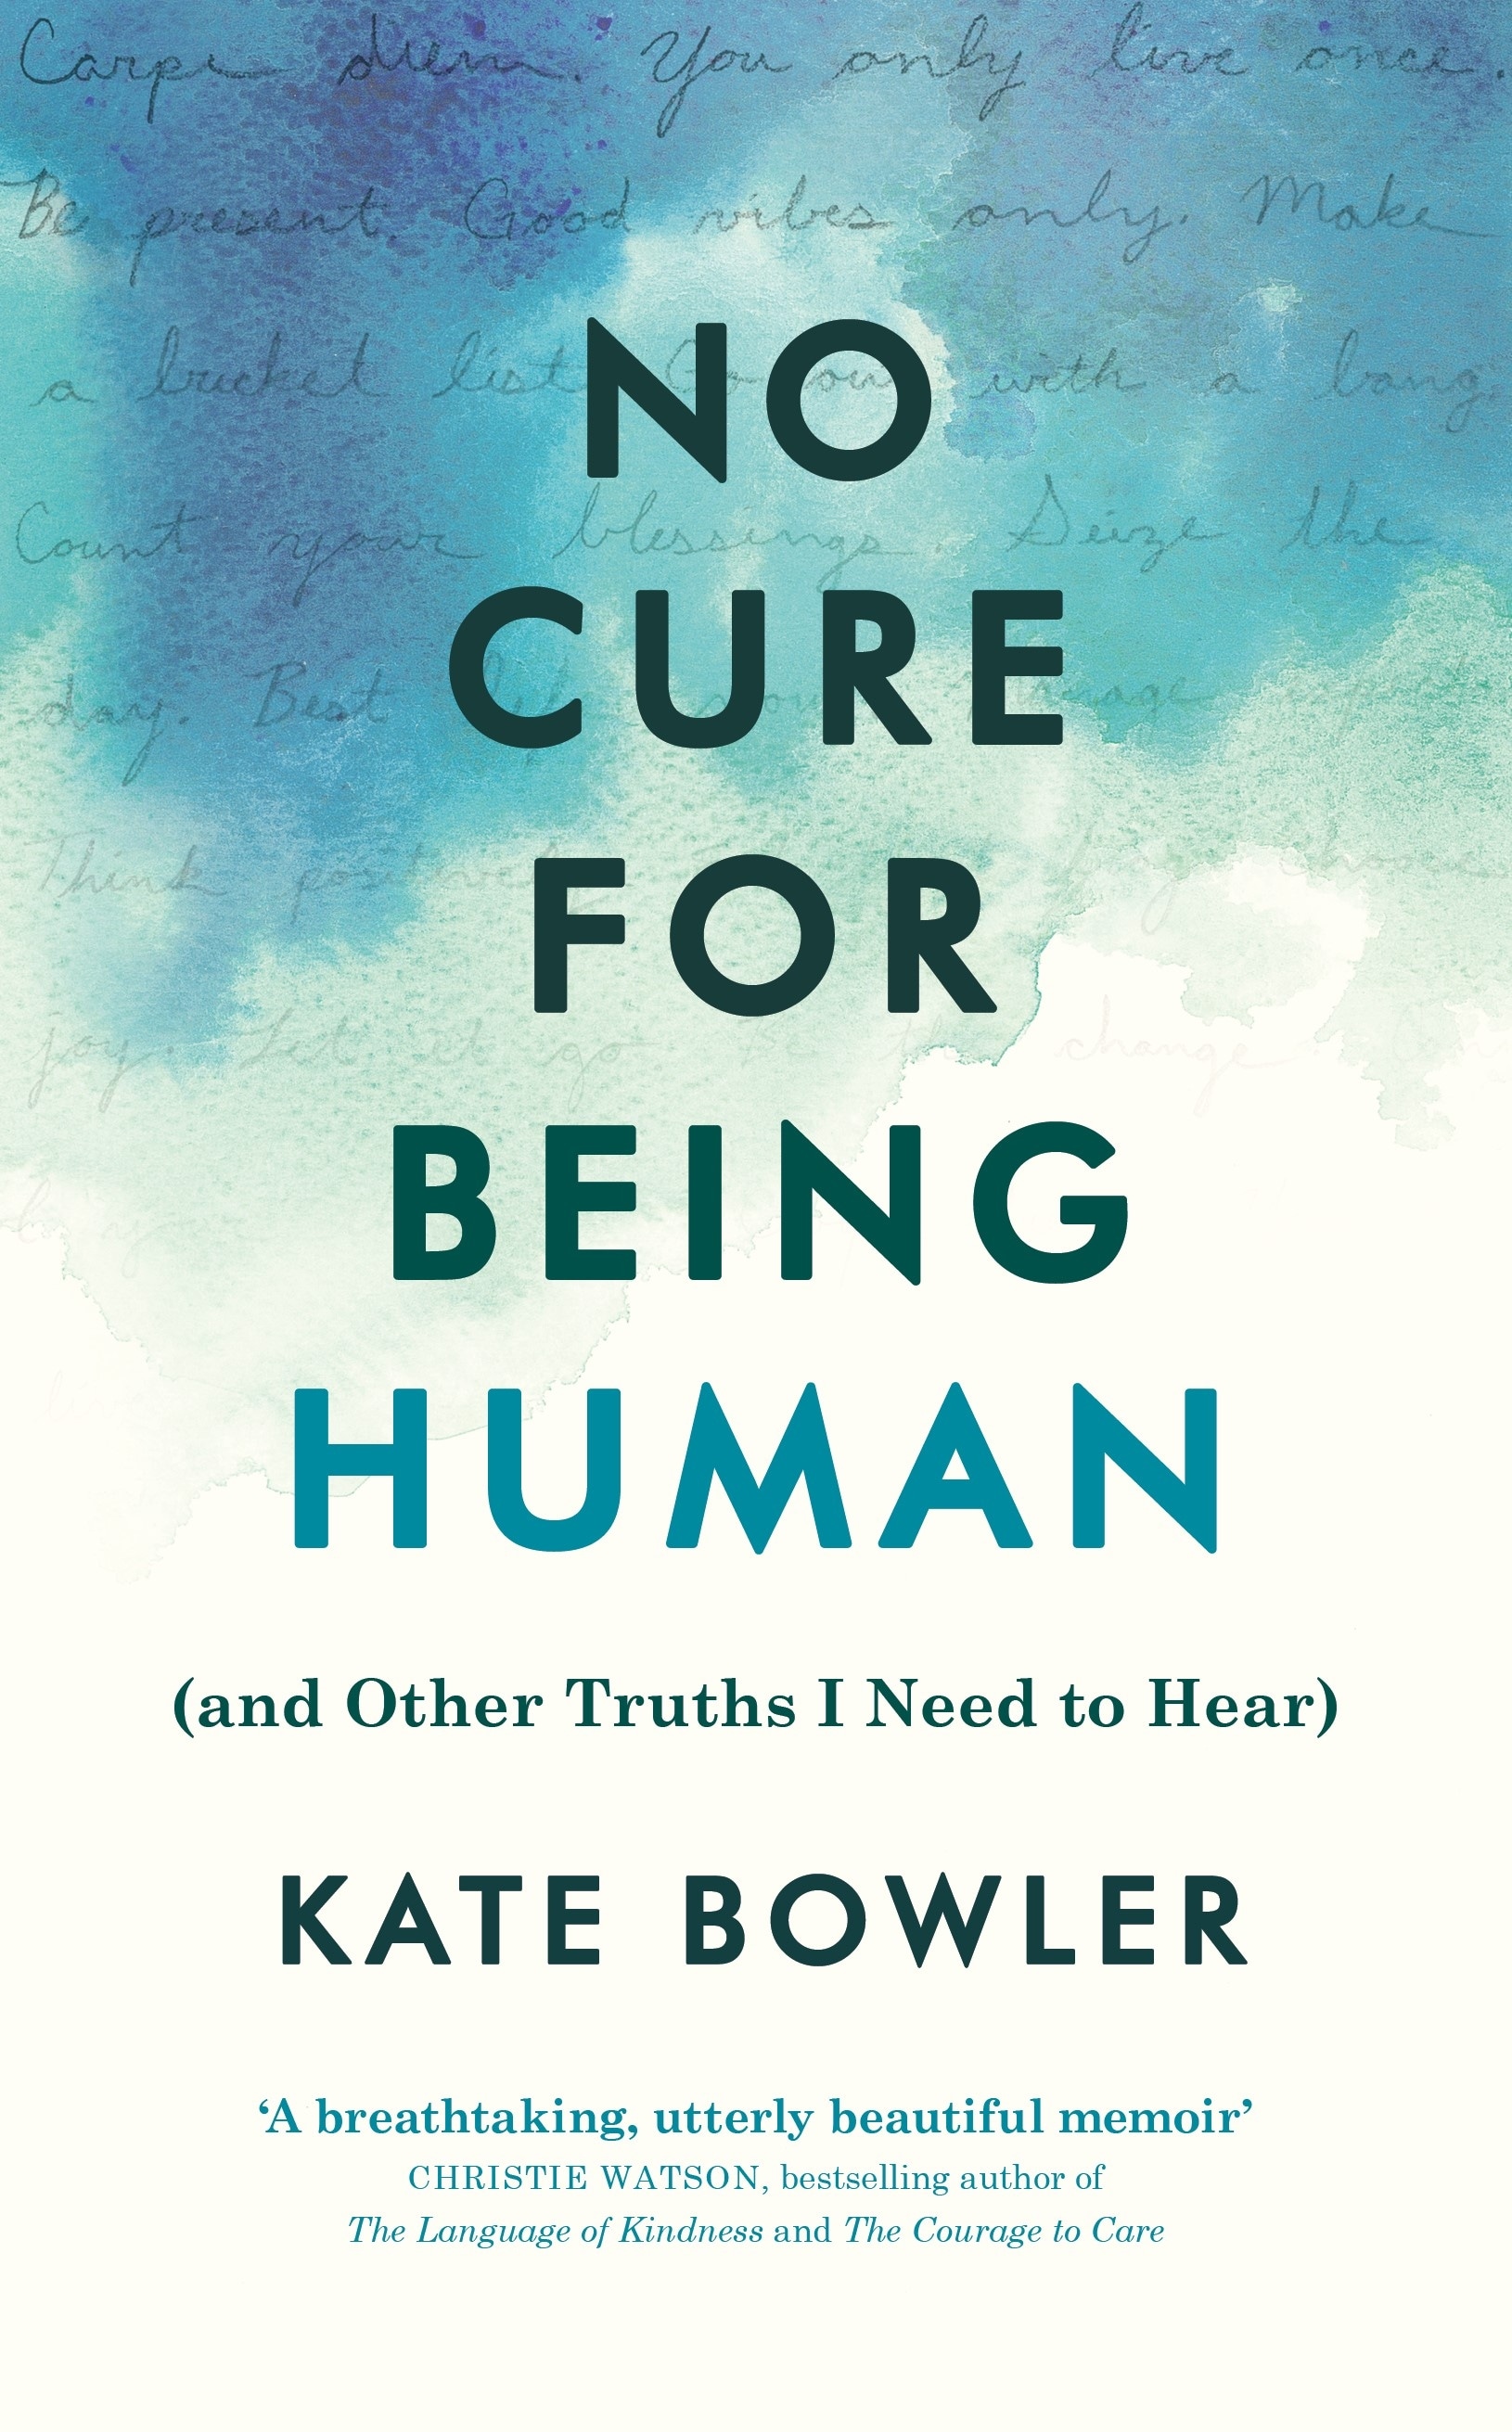 Book “No Cure for Being Human” by Kate Bowler — September 30, 2021